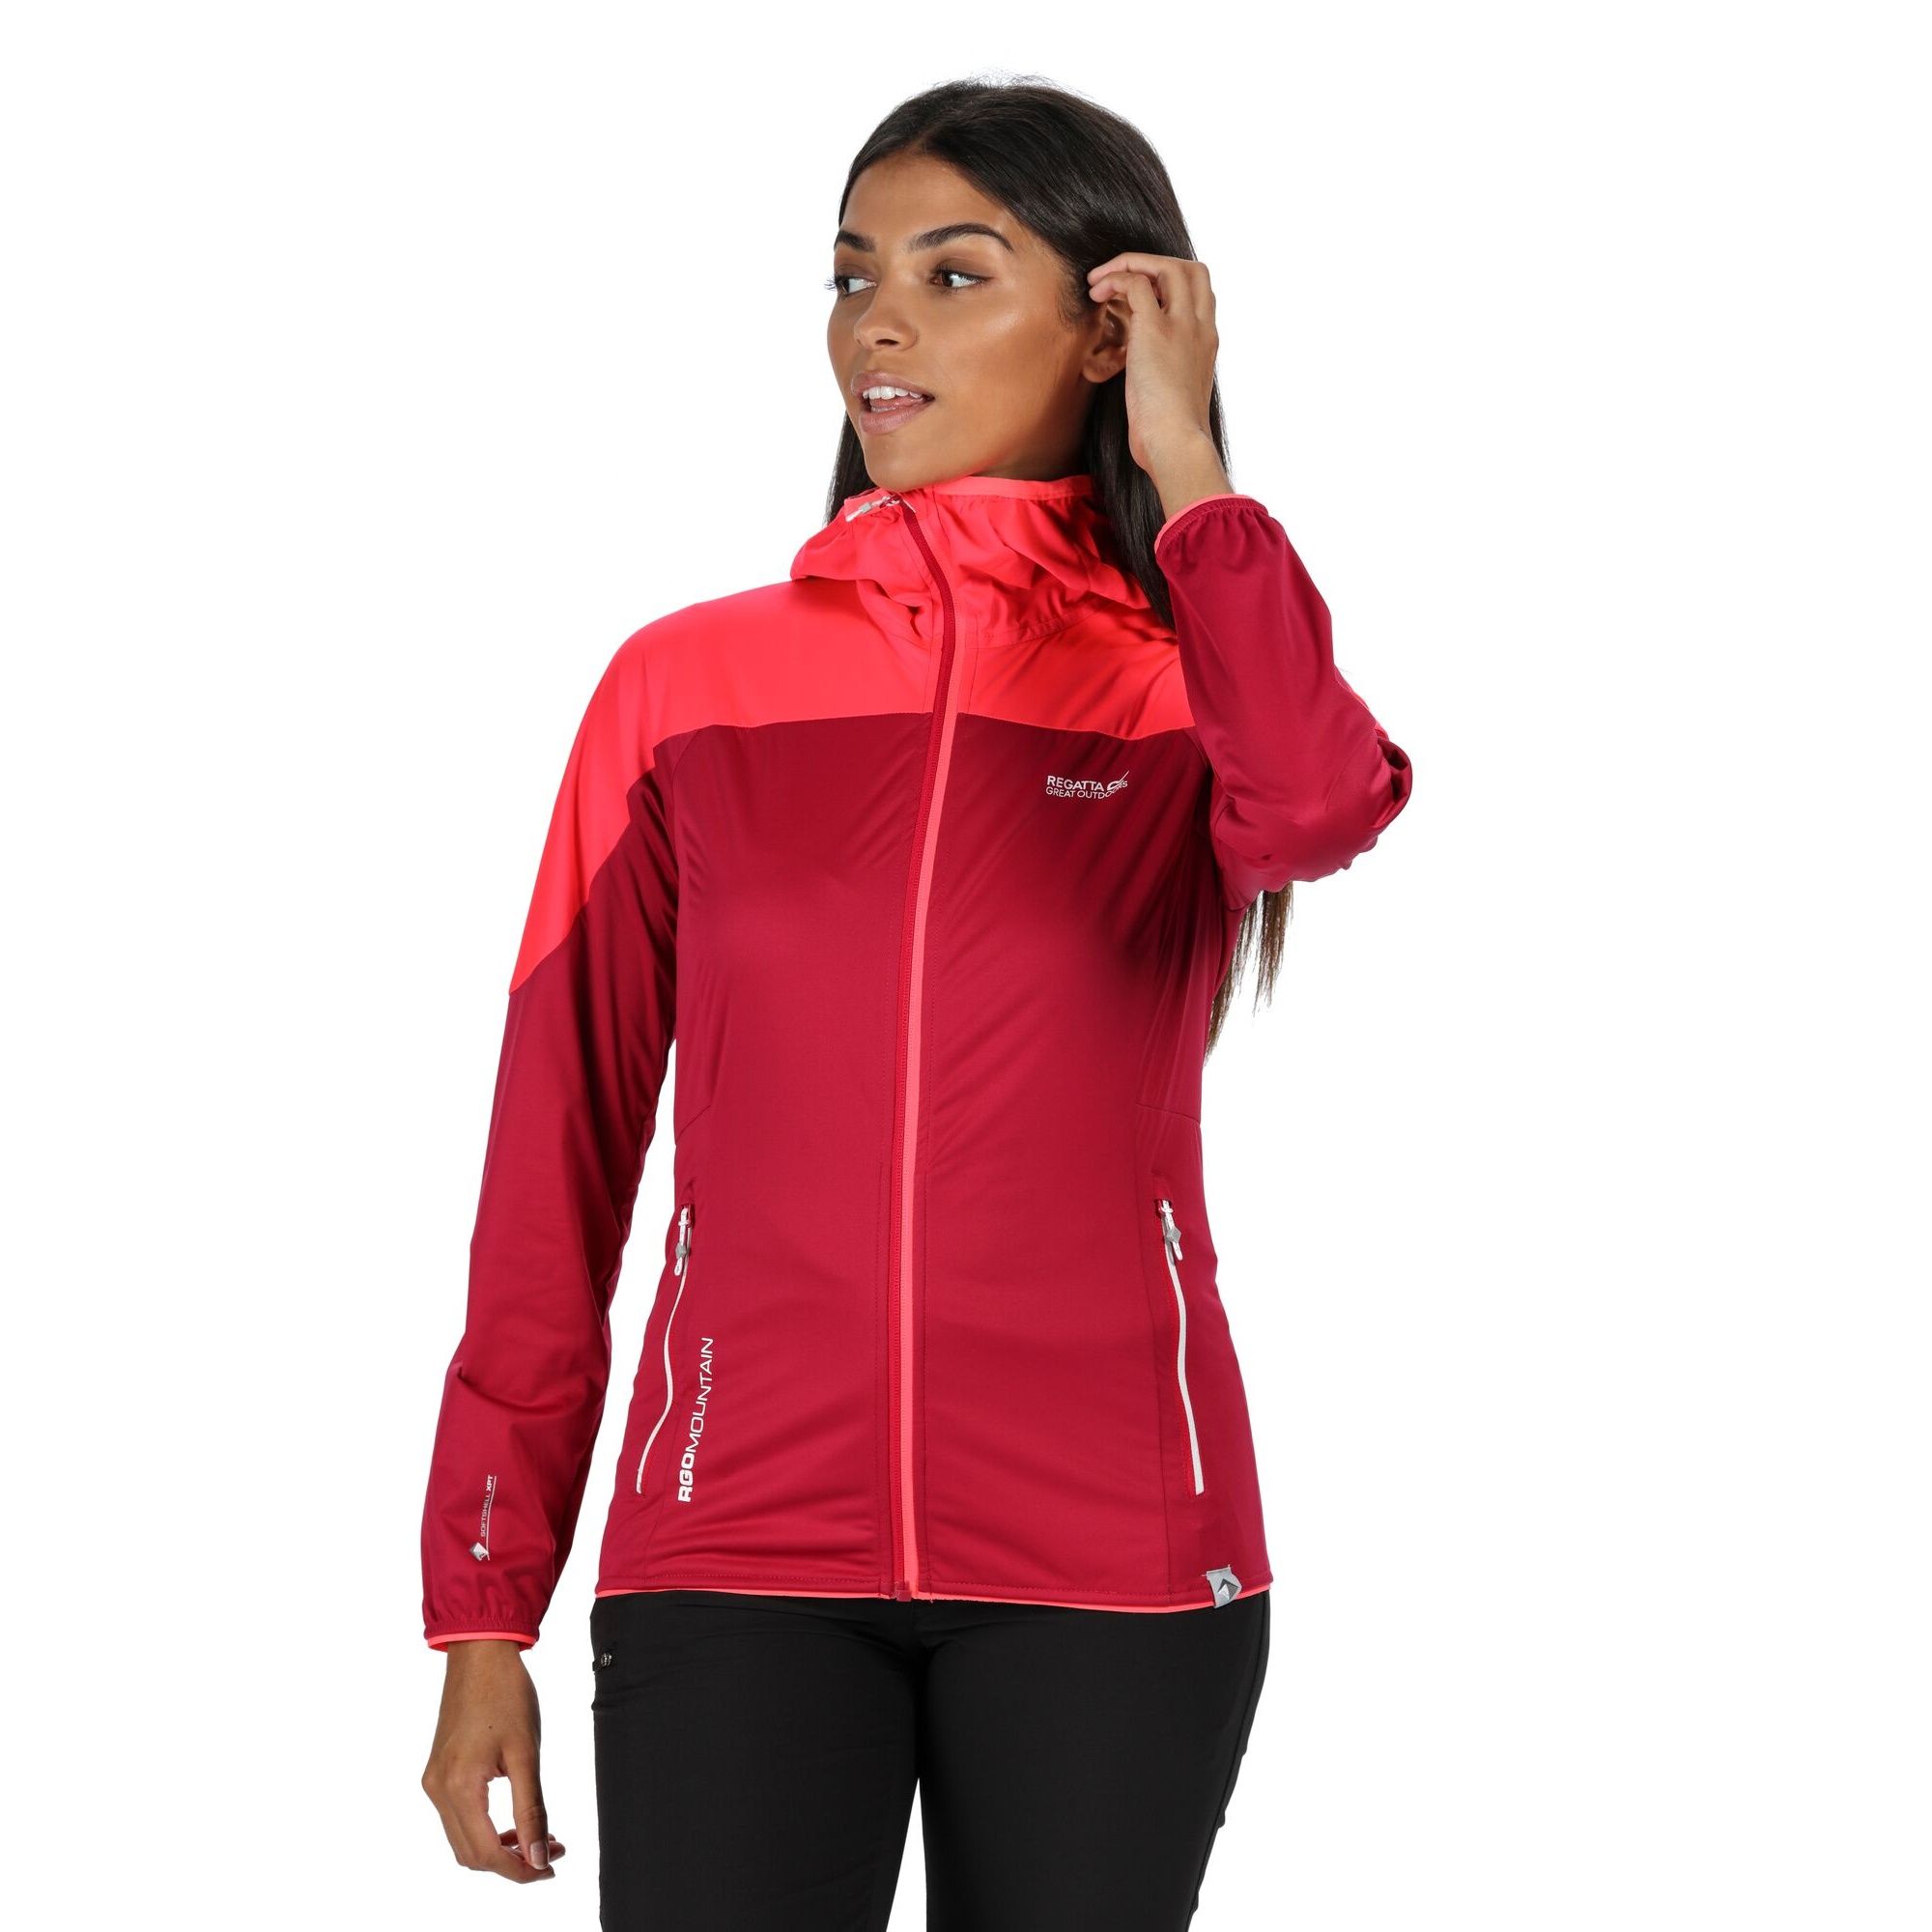 Material: 100% polyester. Waterproof and windproof membrane fabric. Durable water repellent finish. Grown on hood. Inner zip guard. Articulated sleeves for enhanced range of movement. 2 zipped lower pockets. Mesh lined pockets for breathability. Stretch binding to hood opening, cuffs and hem.